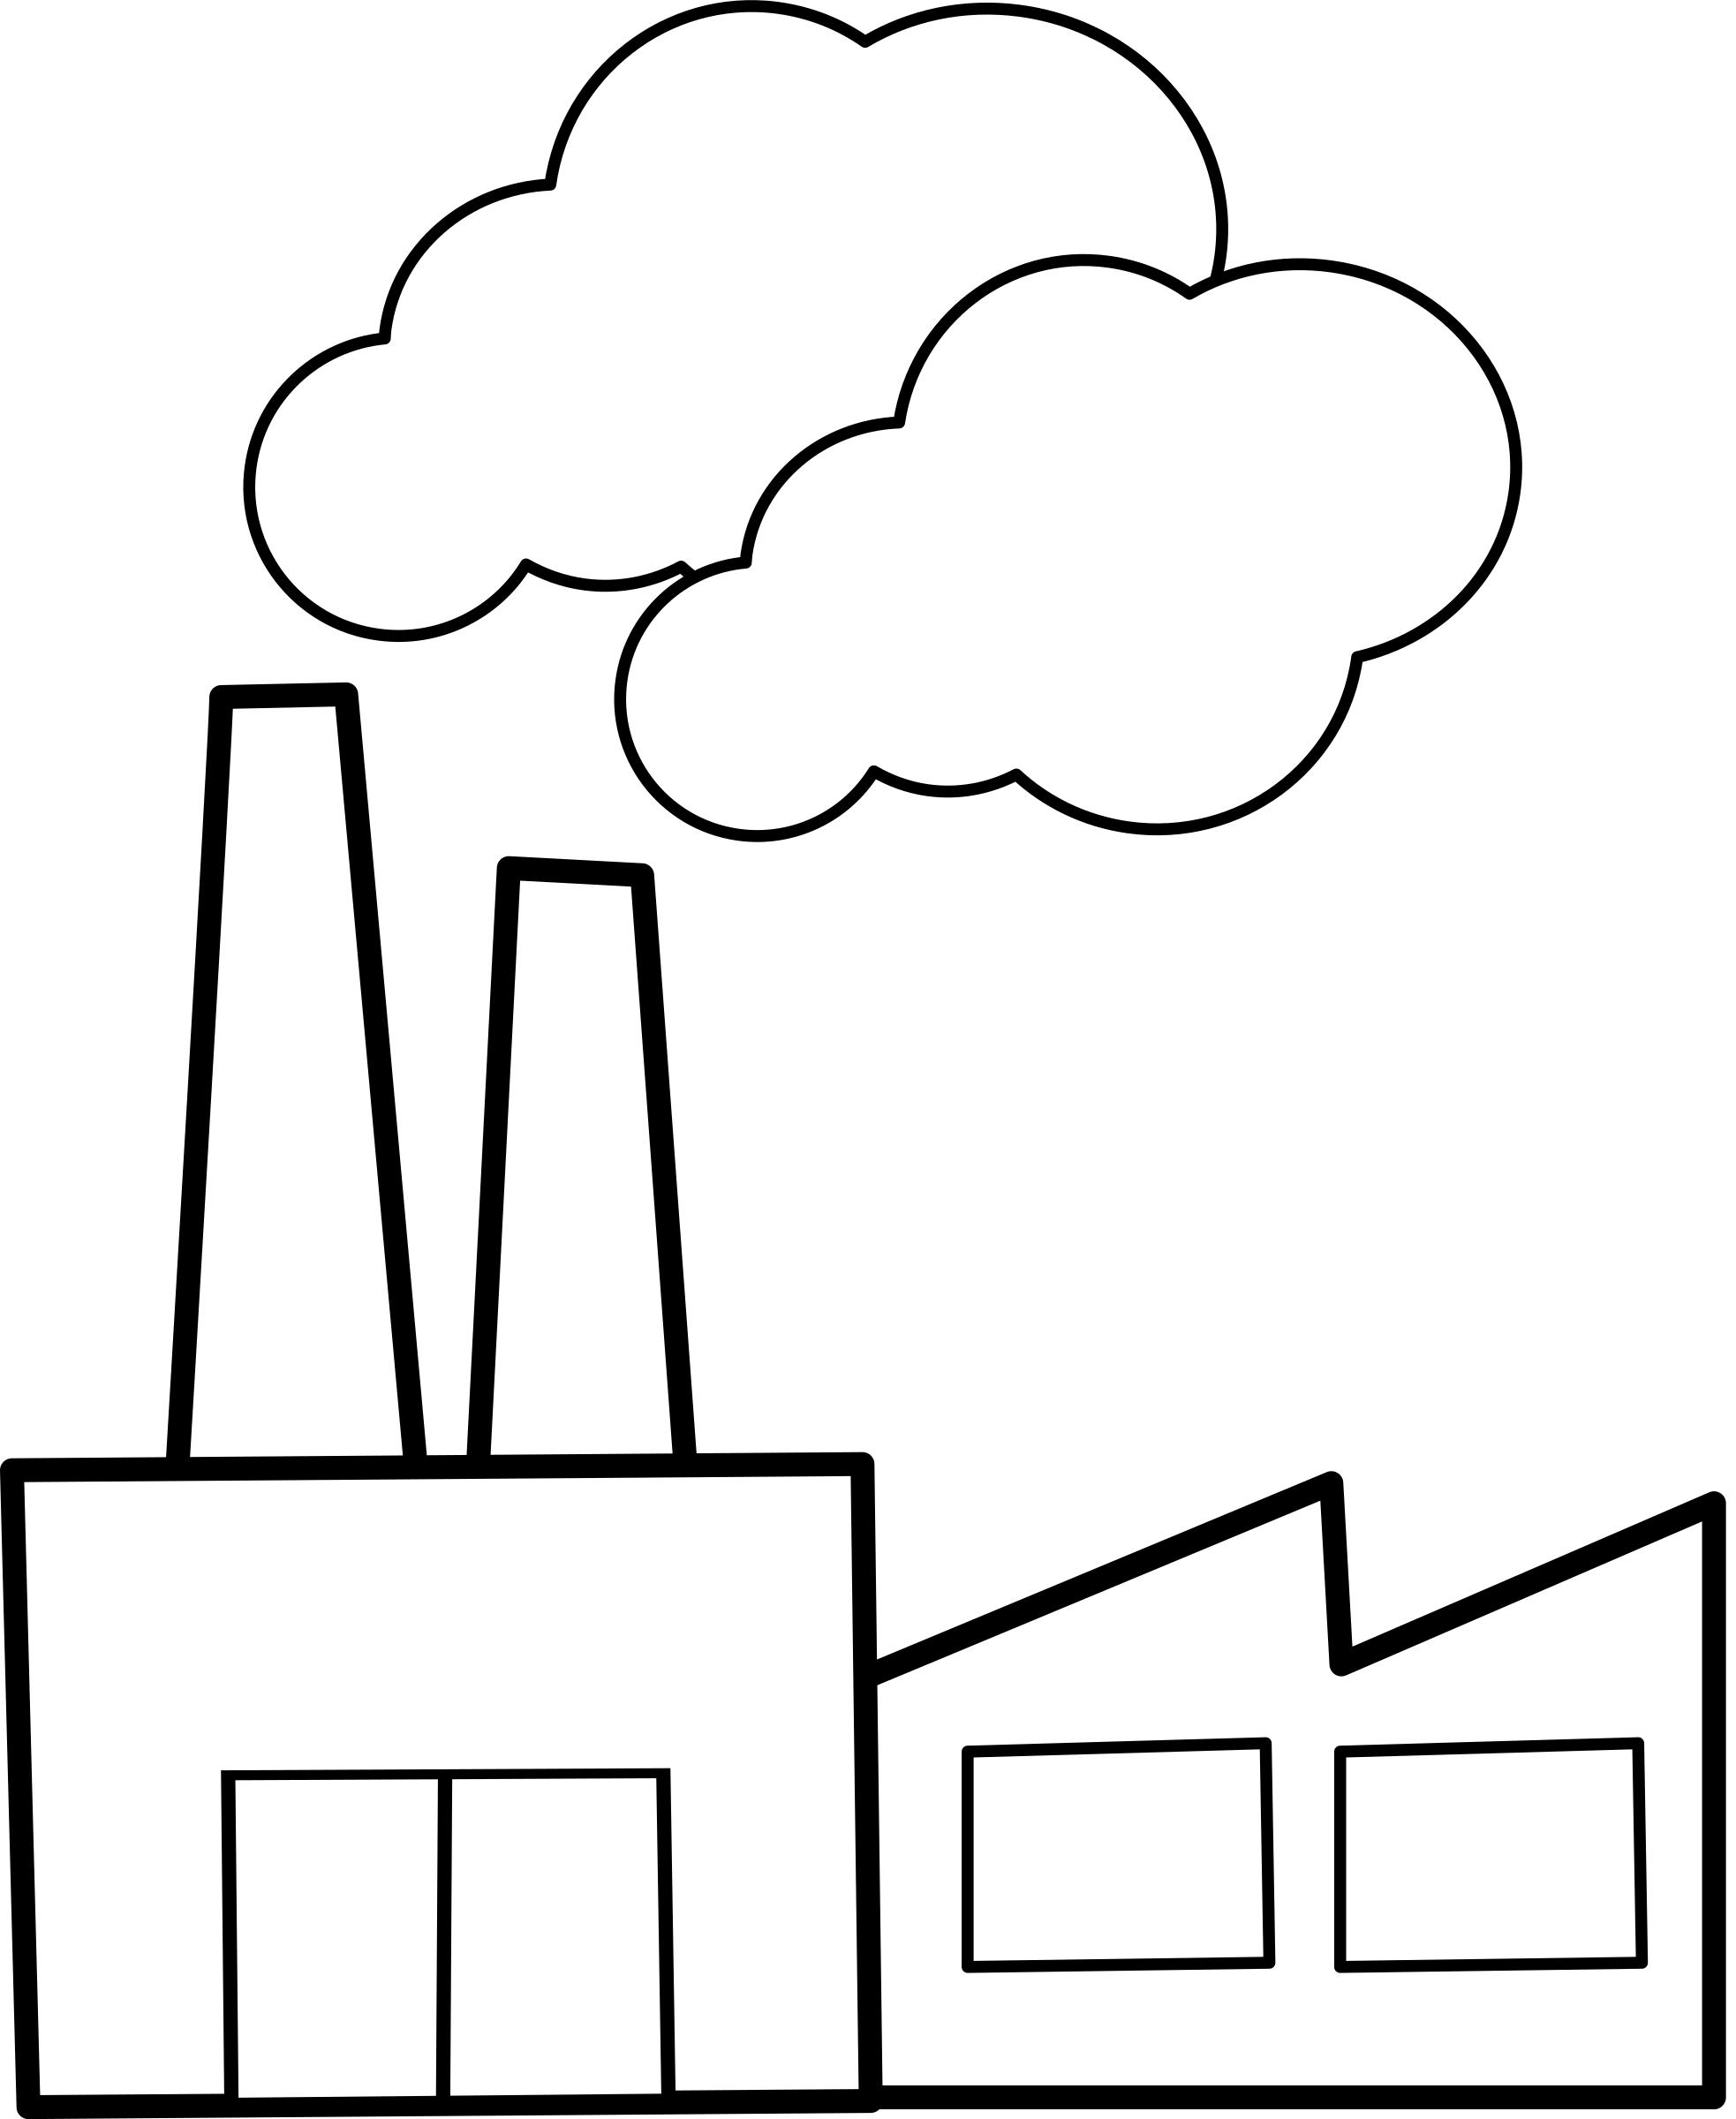 Usine / Factory png